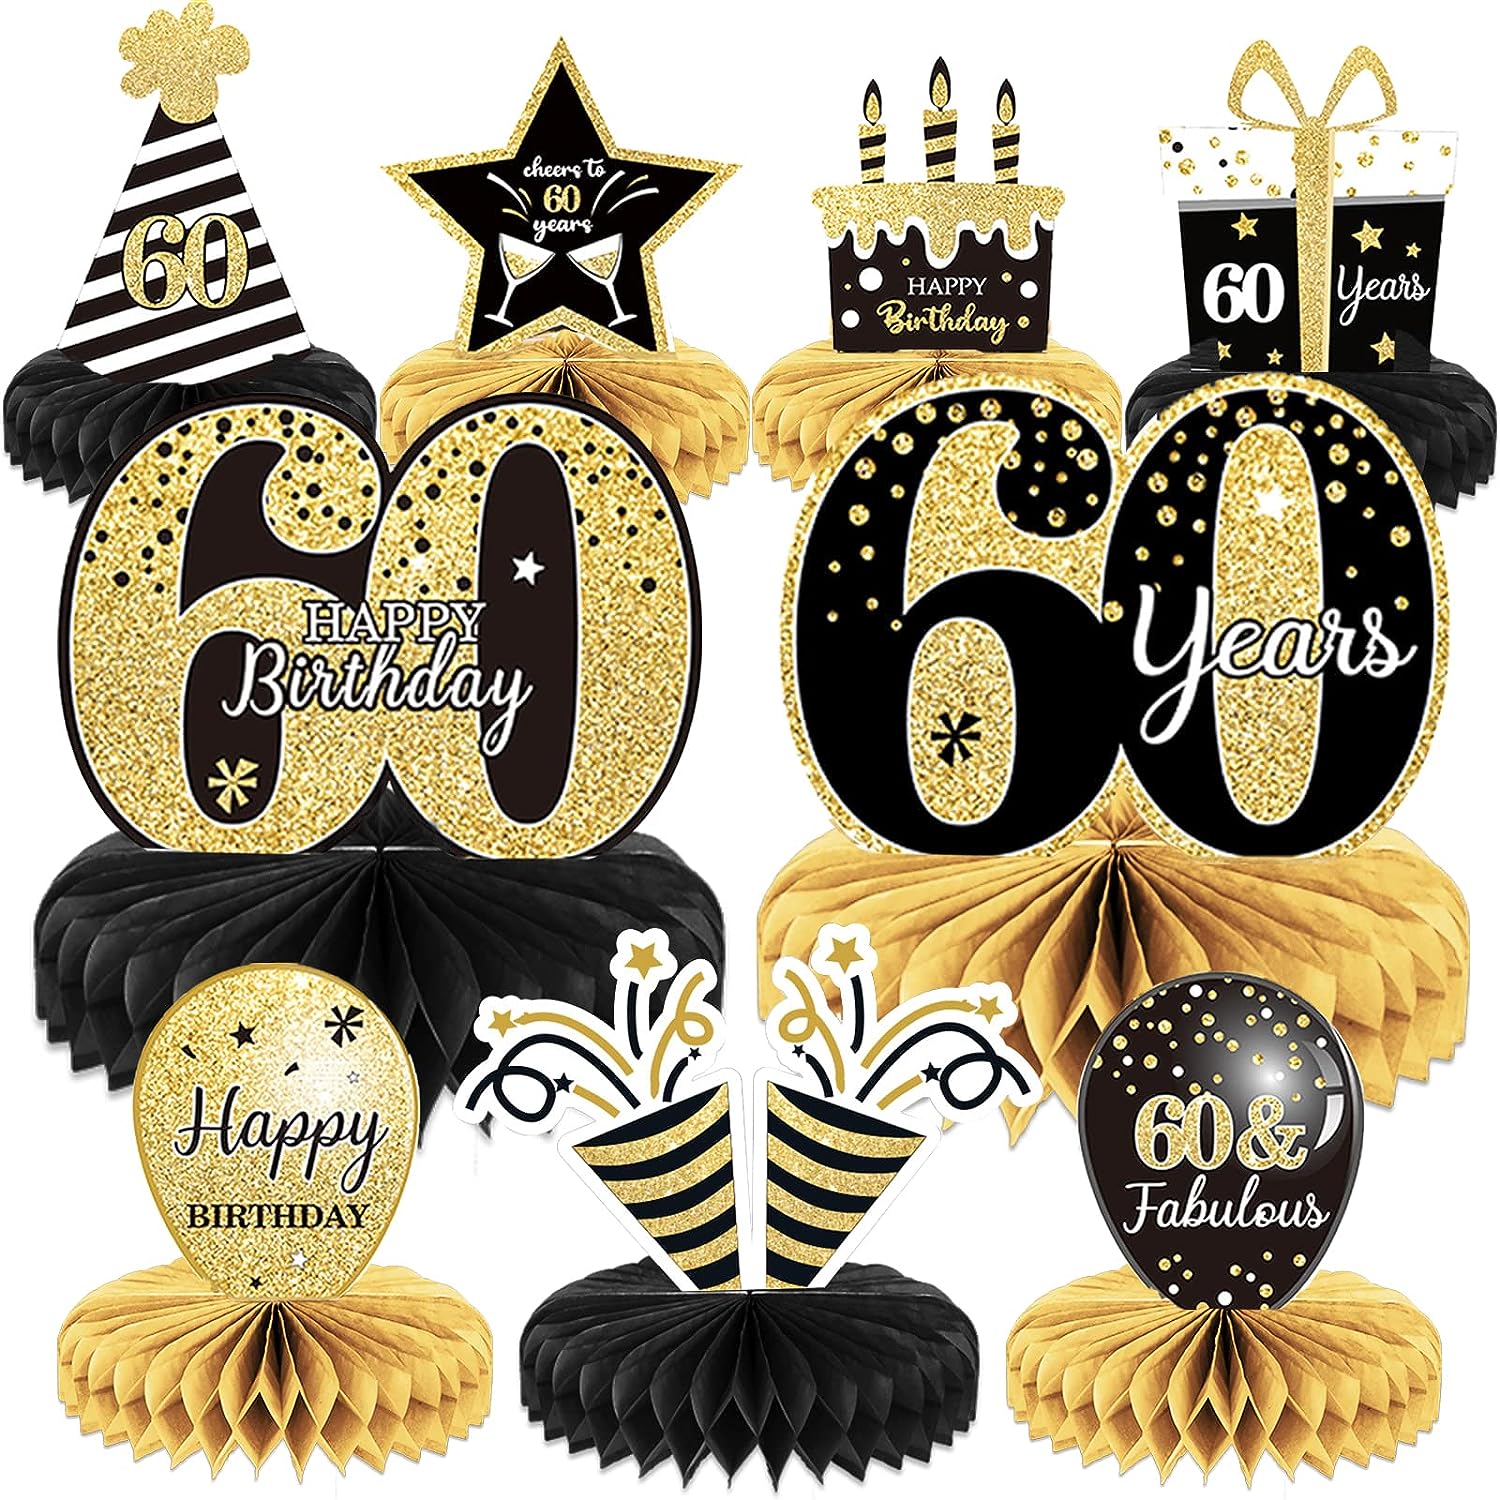 60th Anniversary Decorations, 60th Wedding Anniversary Diamond Decorations, Happy 60th Wedding Anniversary Decor with Foil Balloon and Latex Balloon